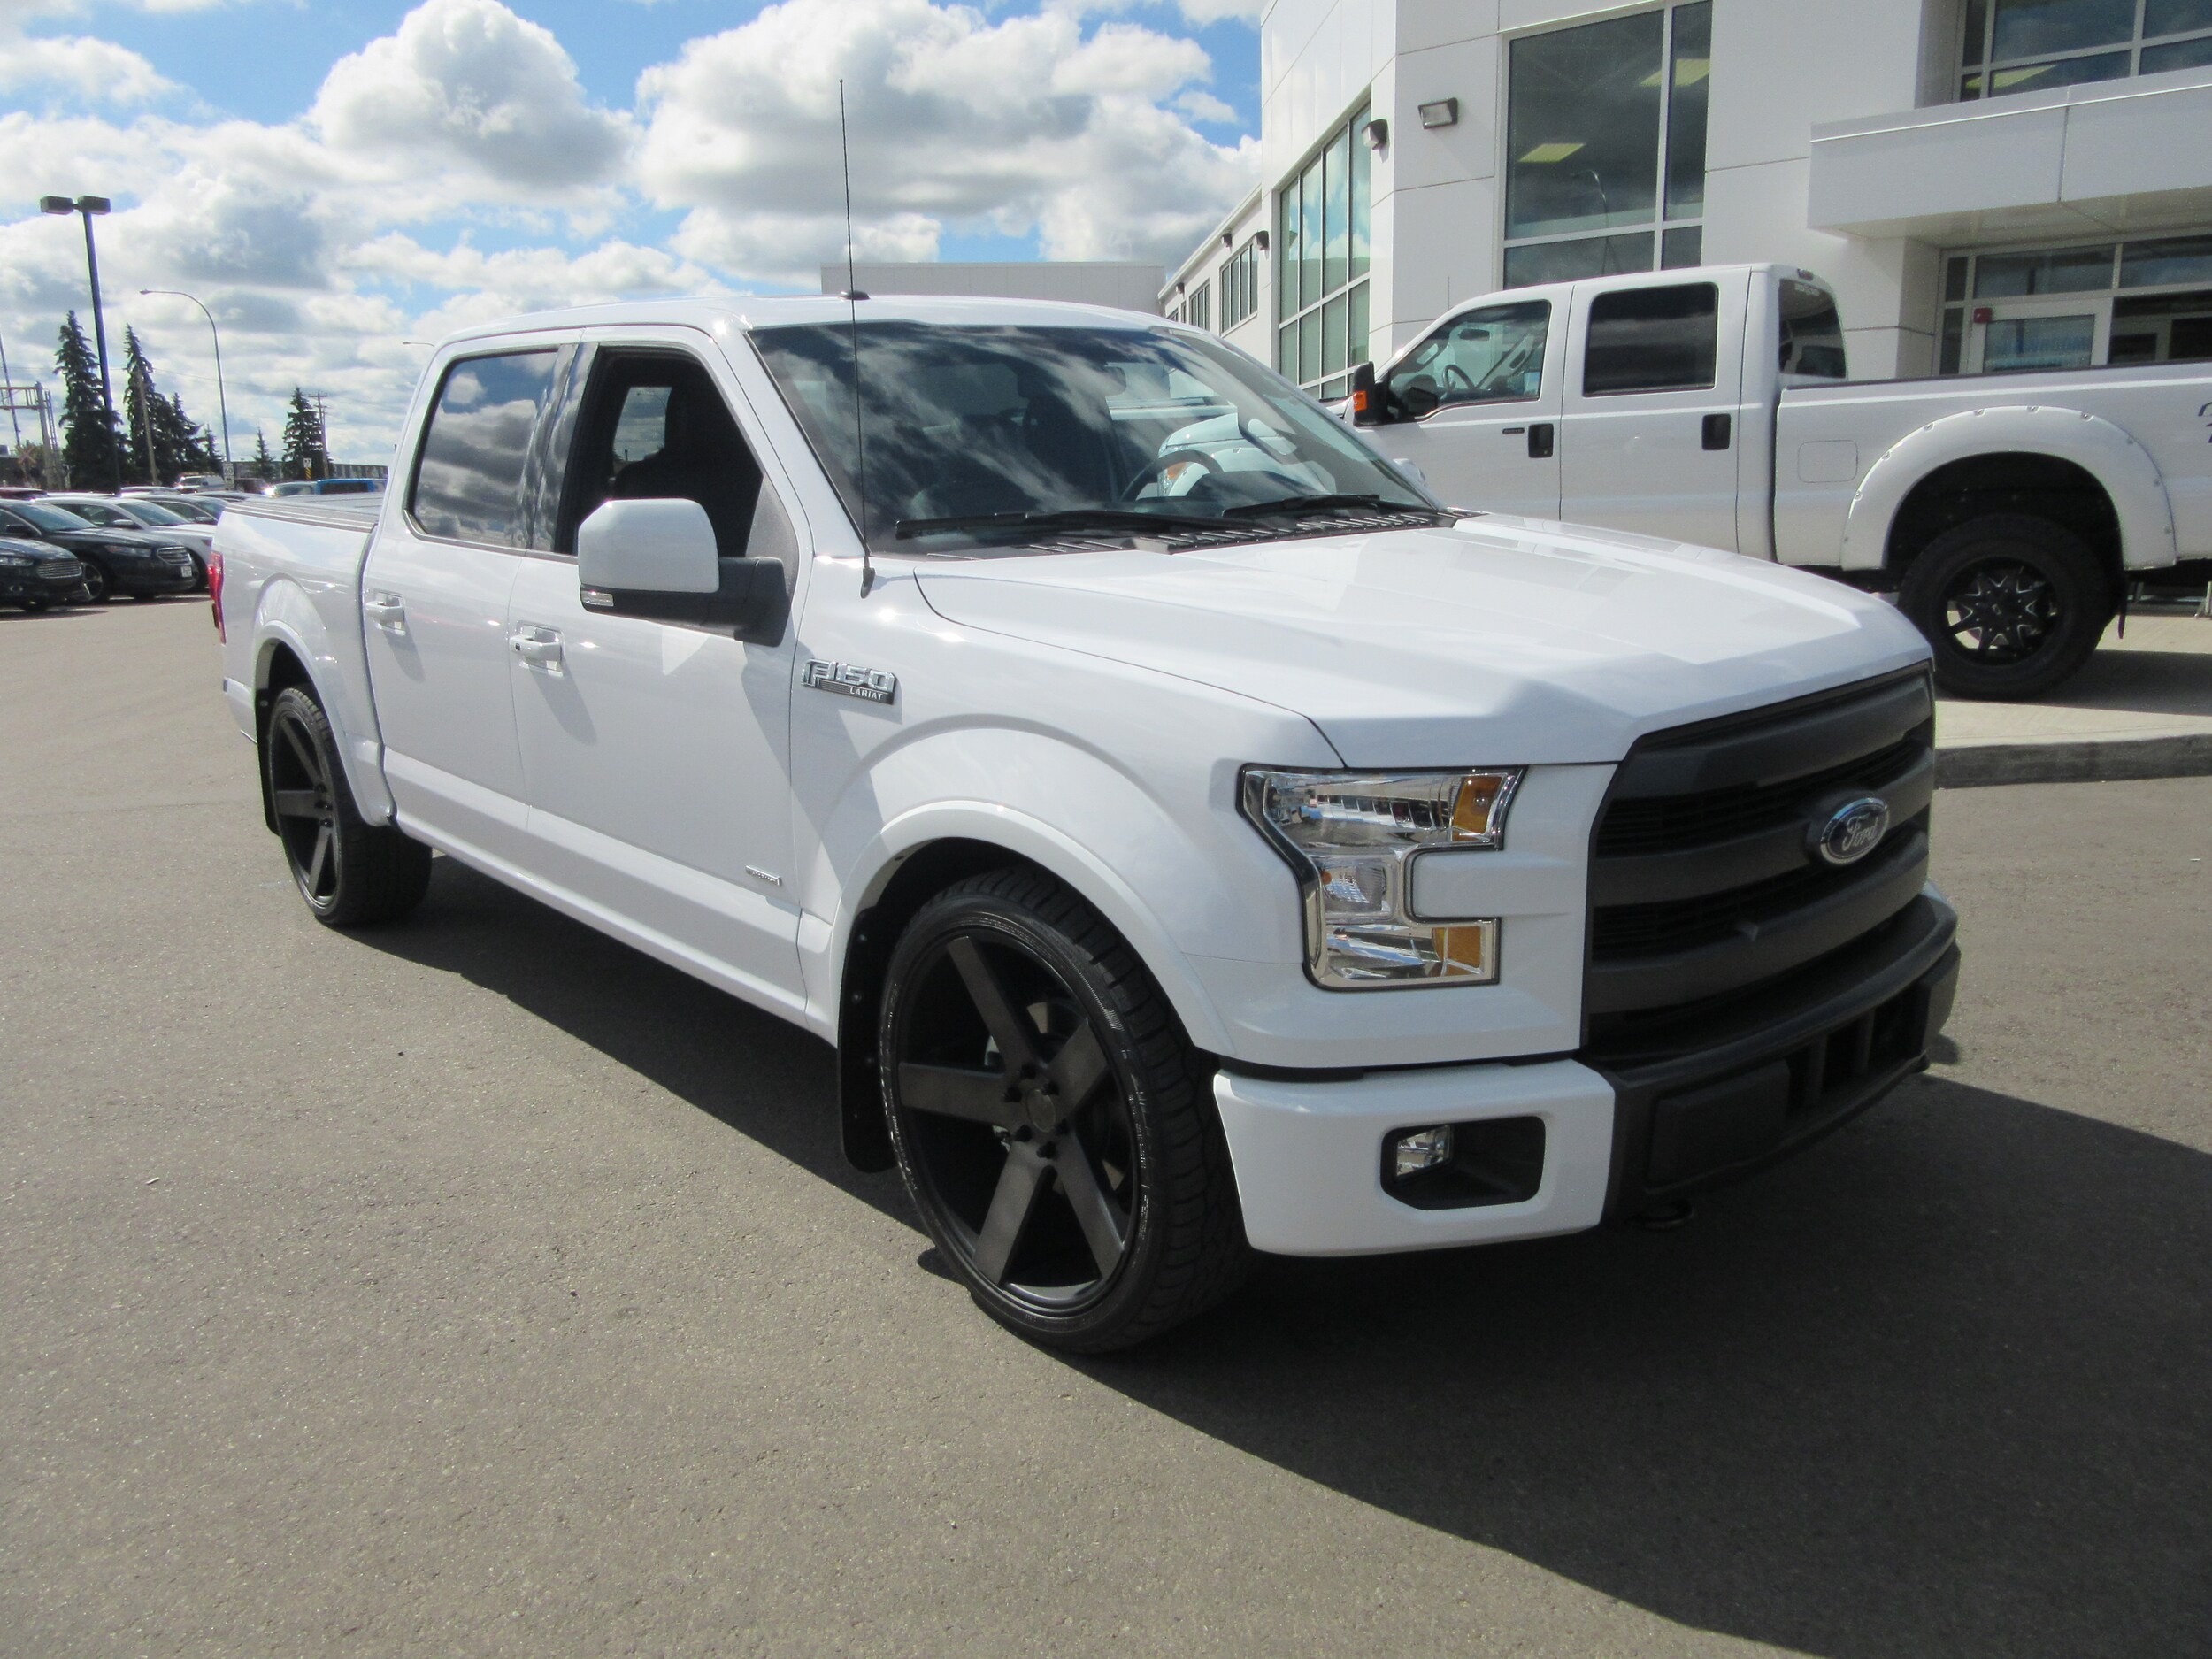 Competition ford spruce grove #9